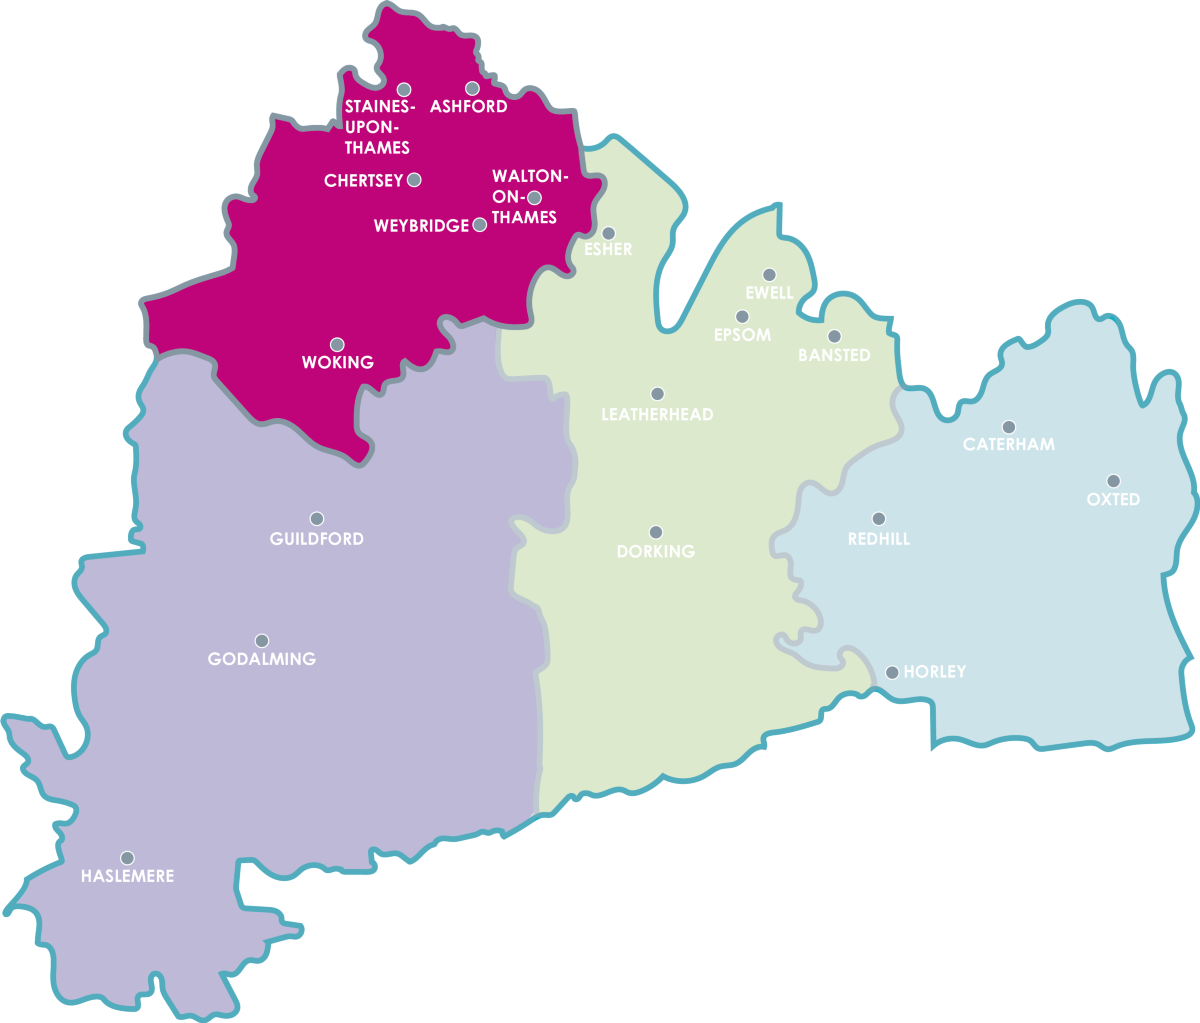 image-NWS_Fill_Pink_Surrey_Heartlands_Places_Faded_with_Towns.png